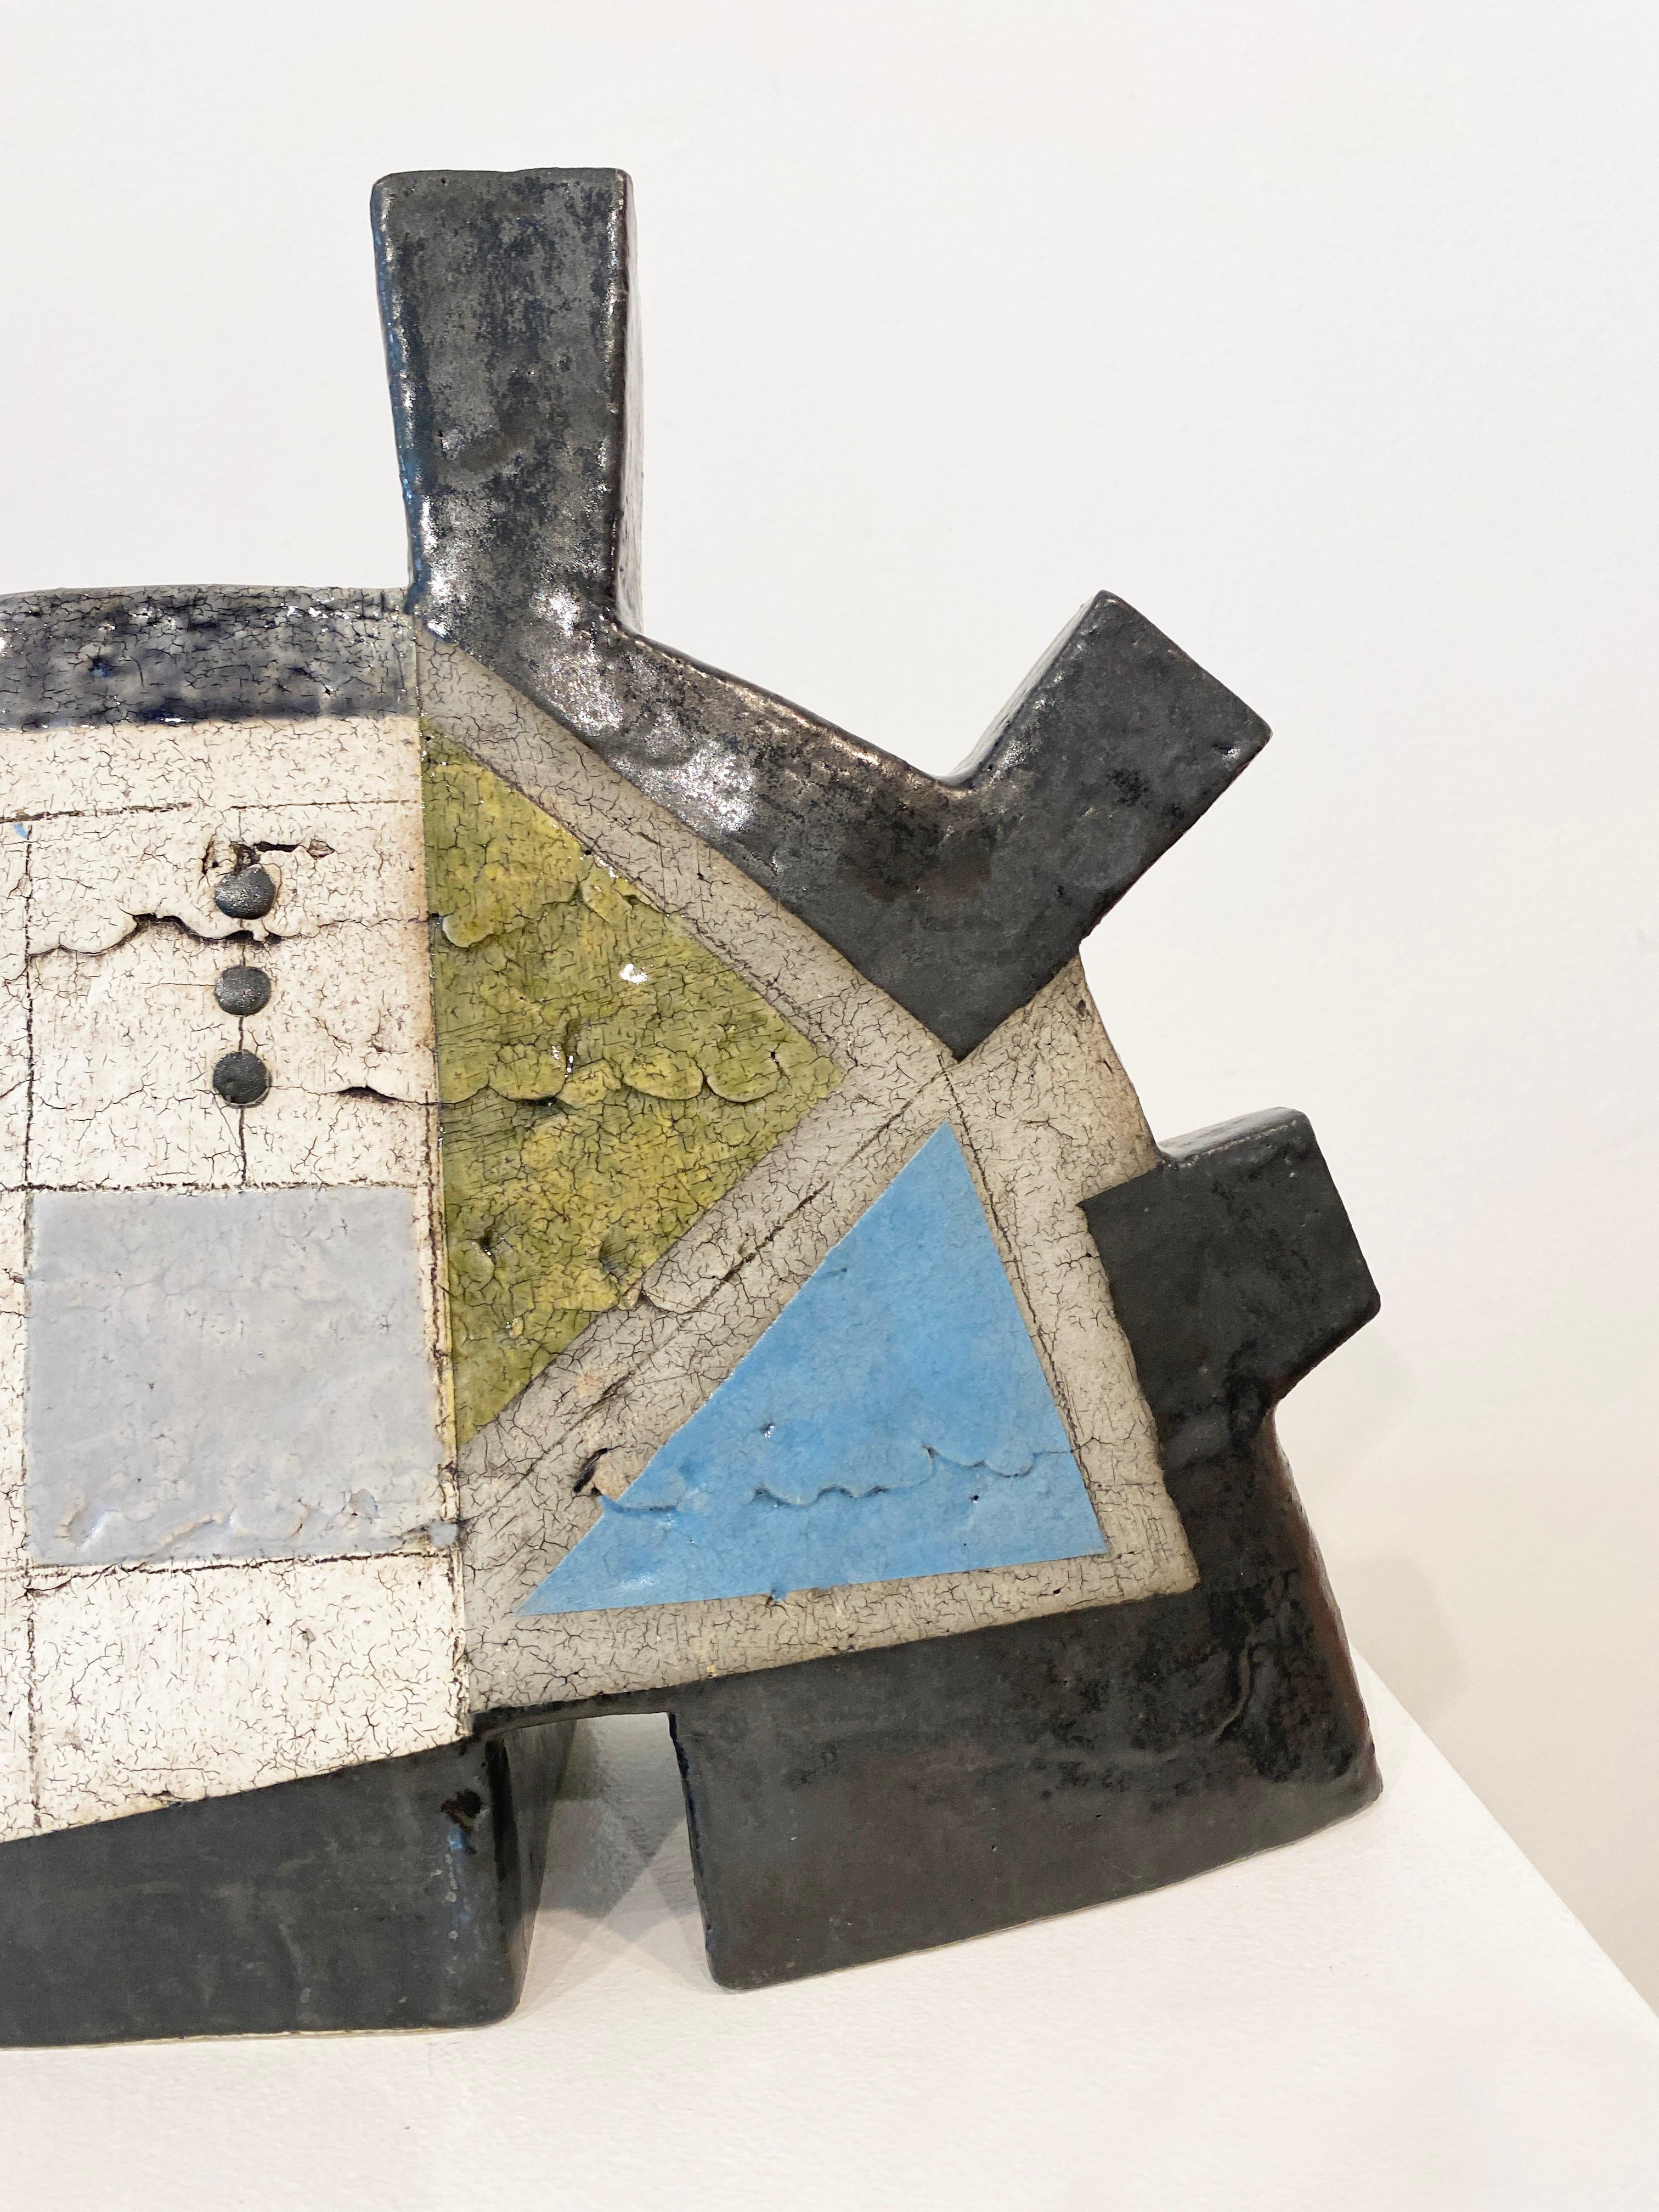 Contemporary Abstract sculpture, Sheryl Zacharia, Seaworthy 1